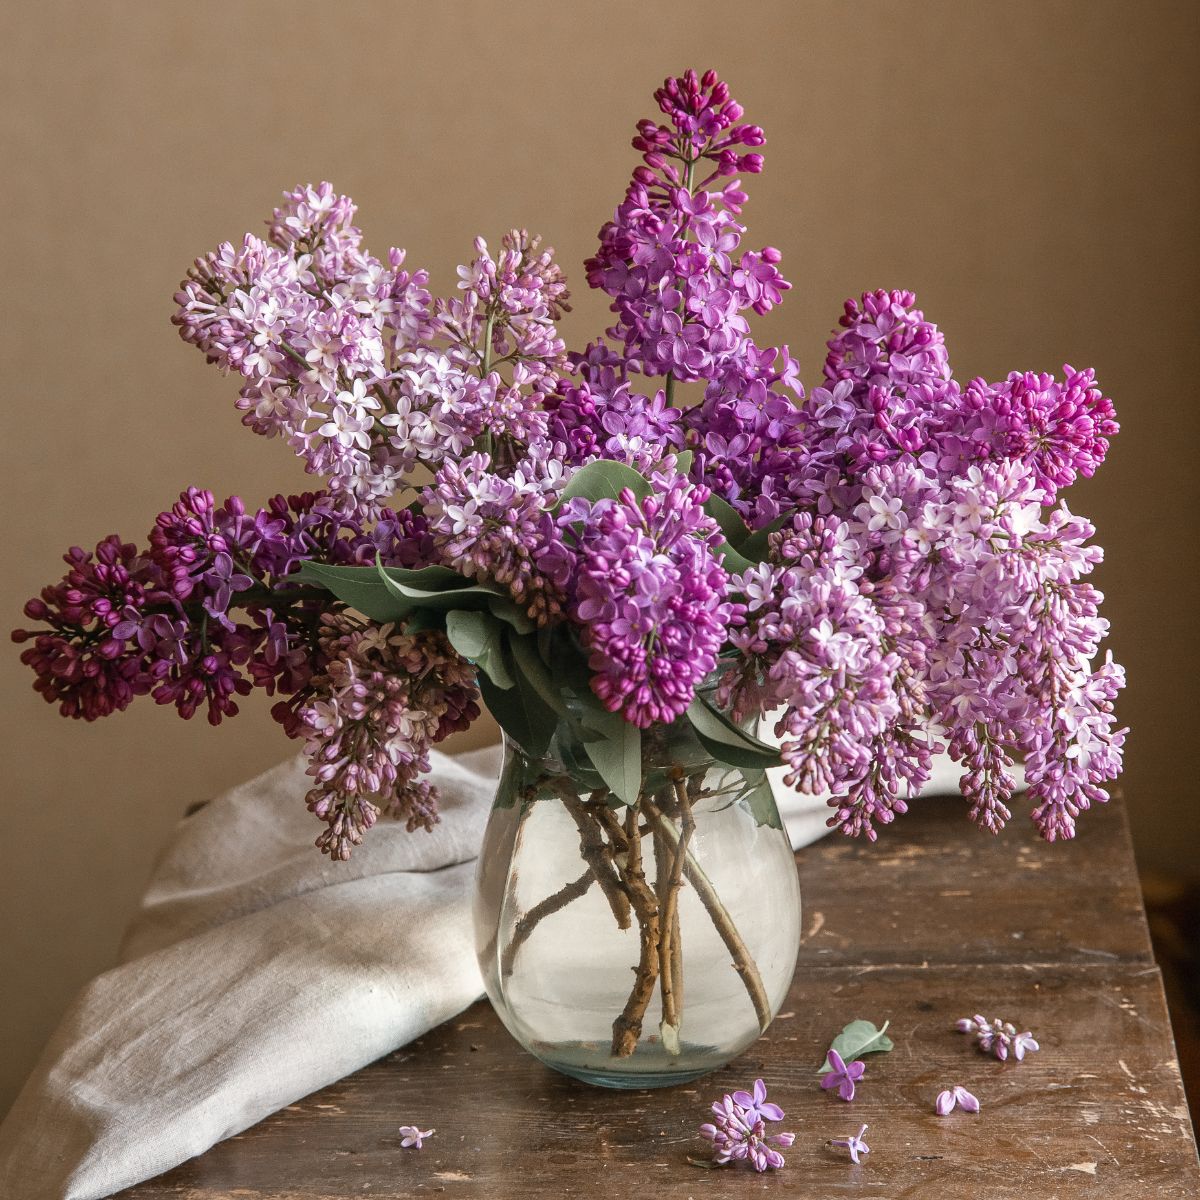 lilacs are one of the most fragrant flowers